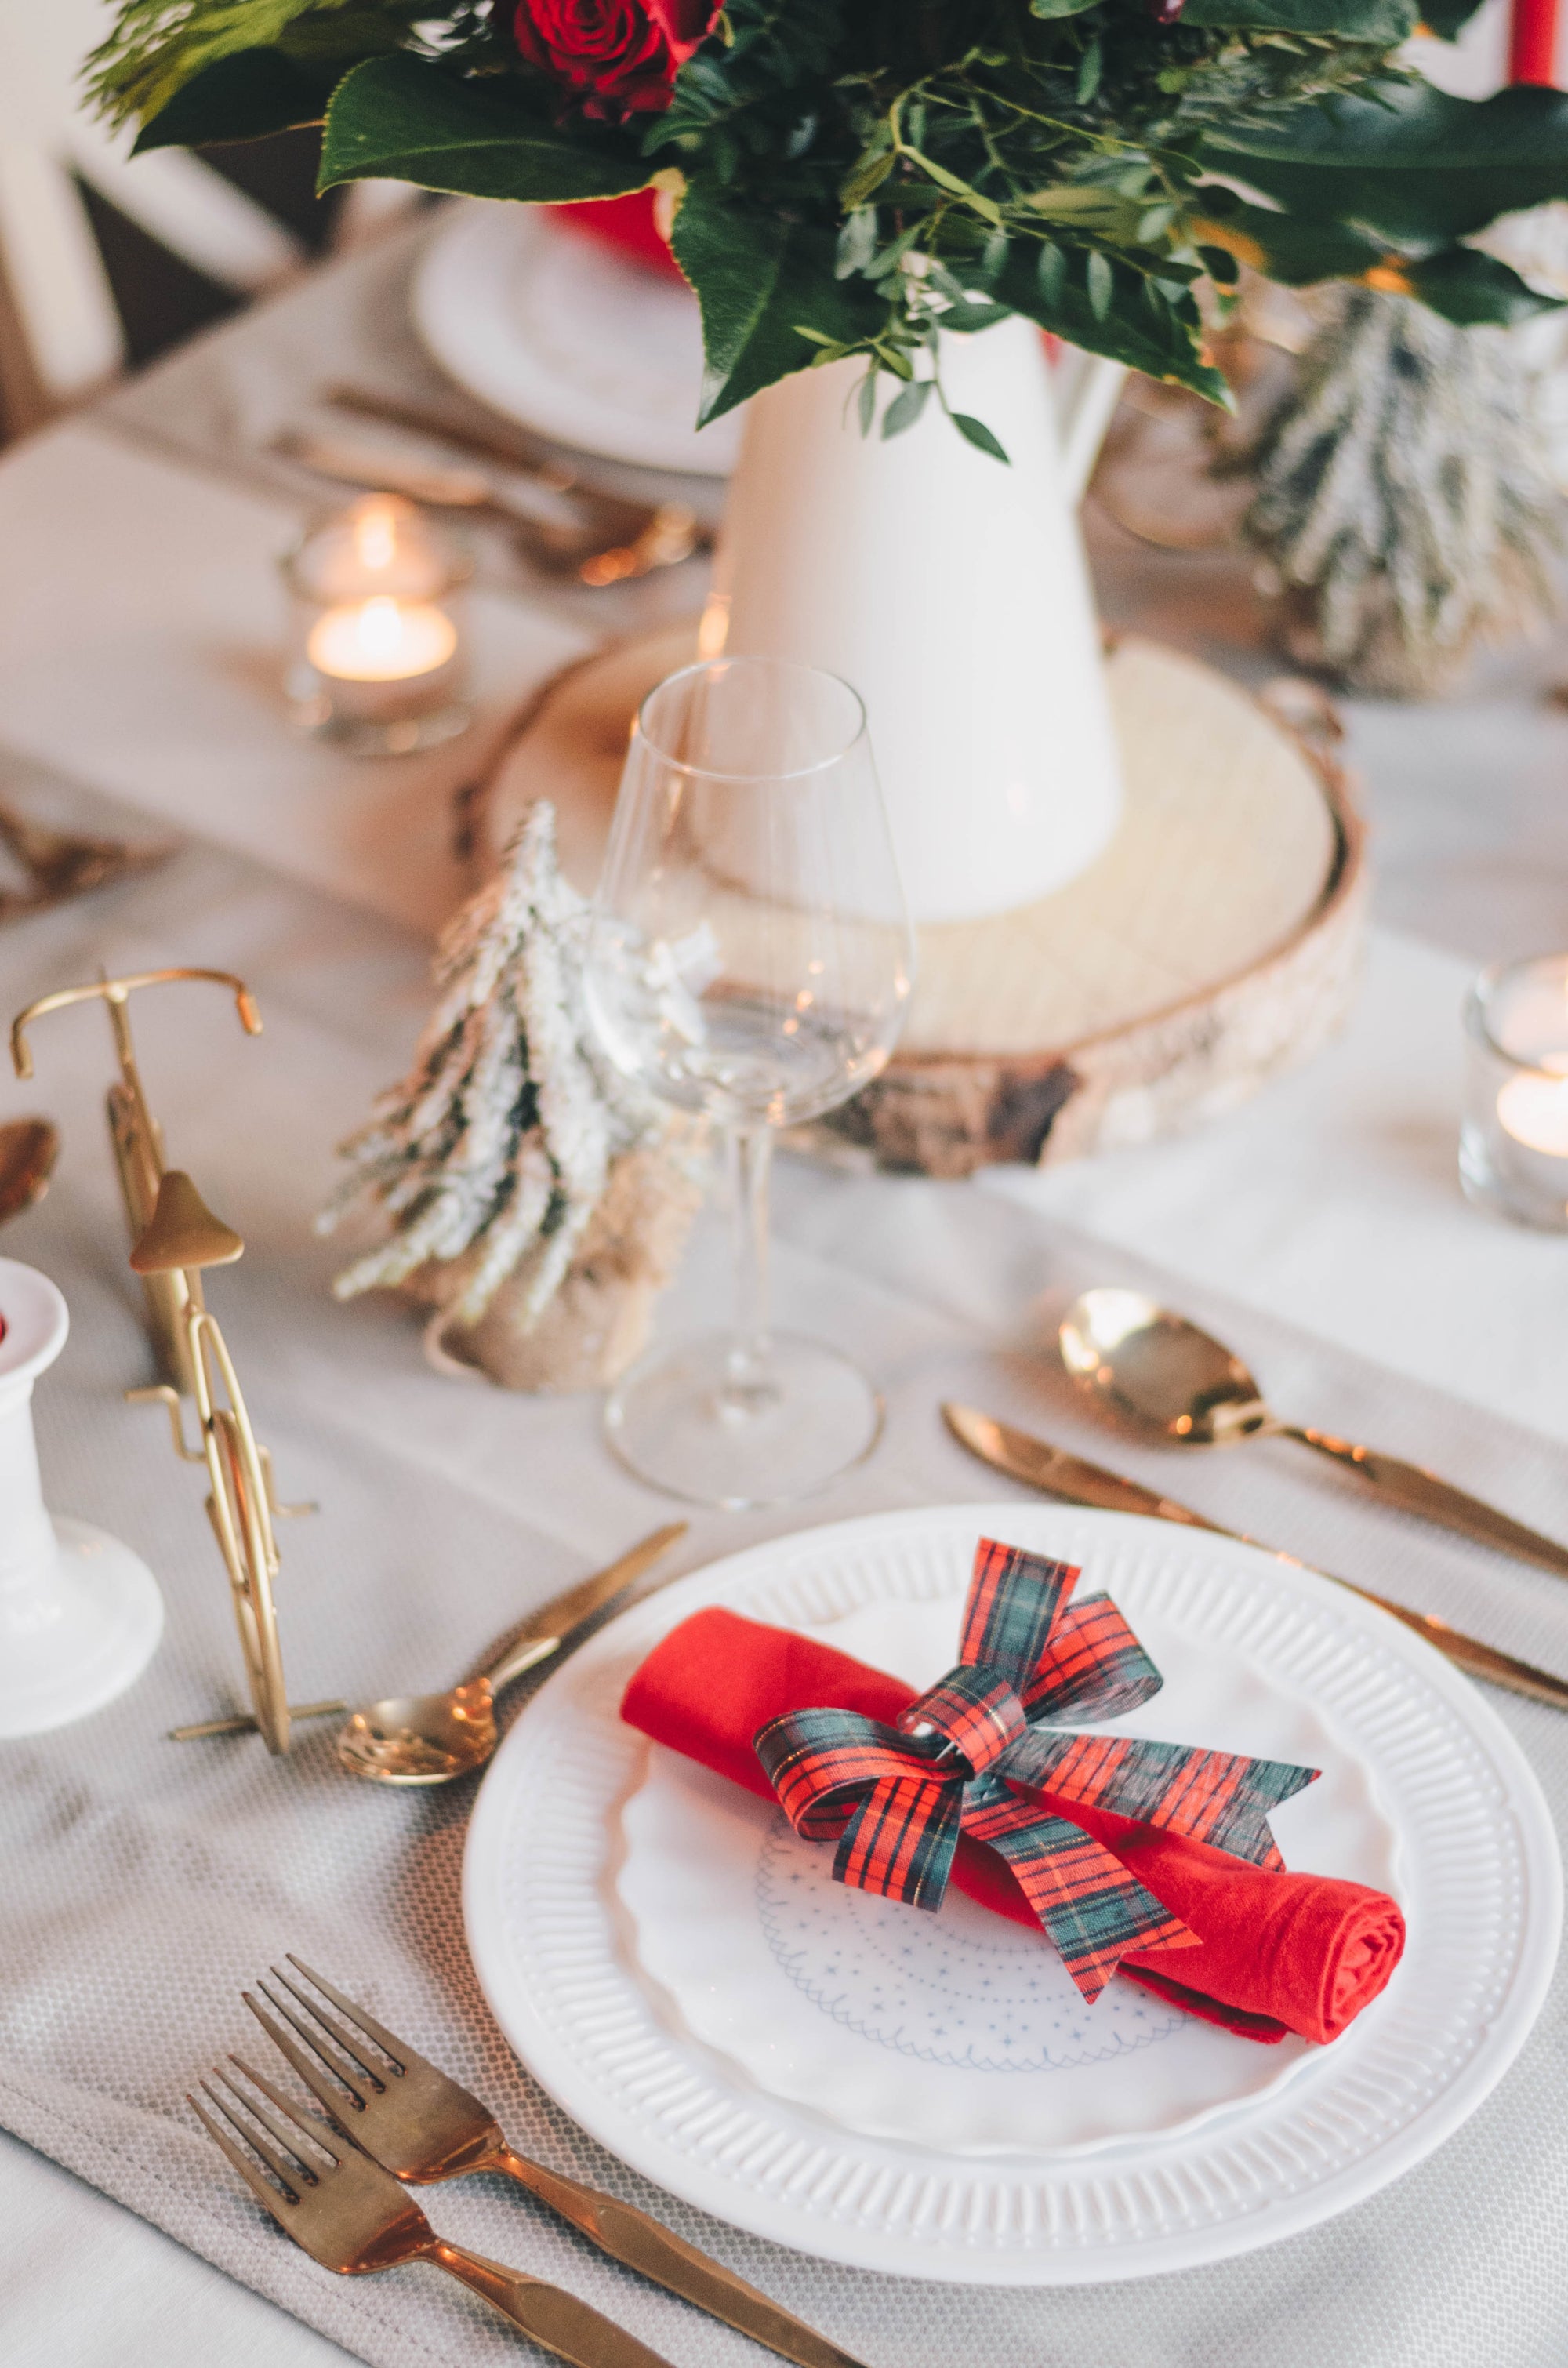 How to Host the Perfect Holiday Gathering